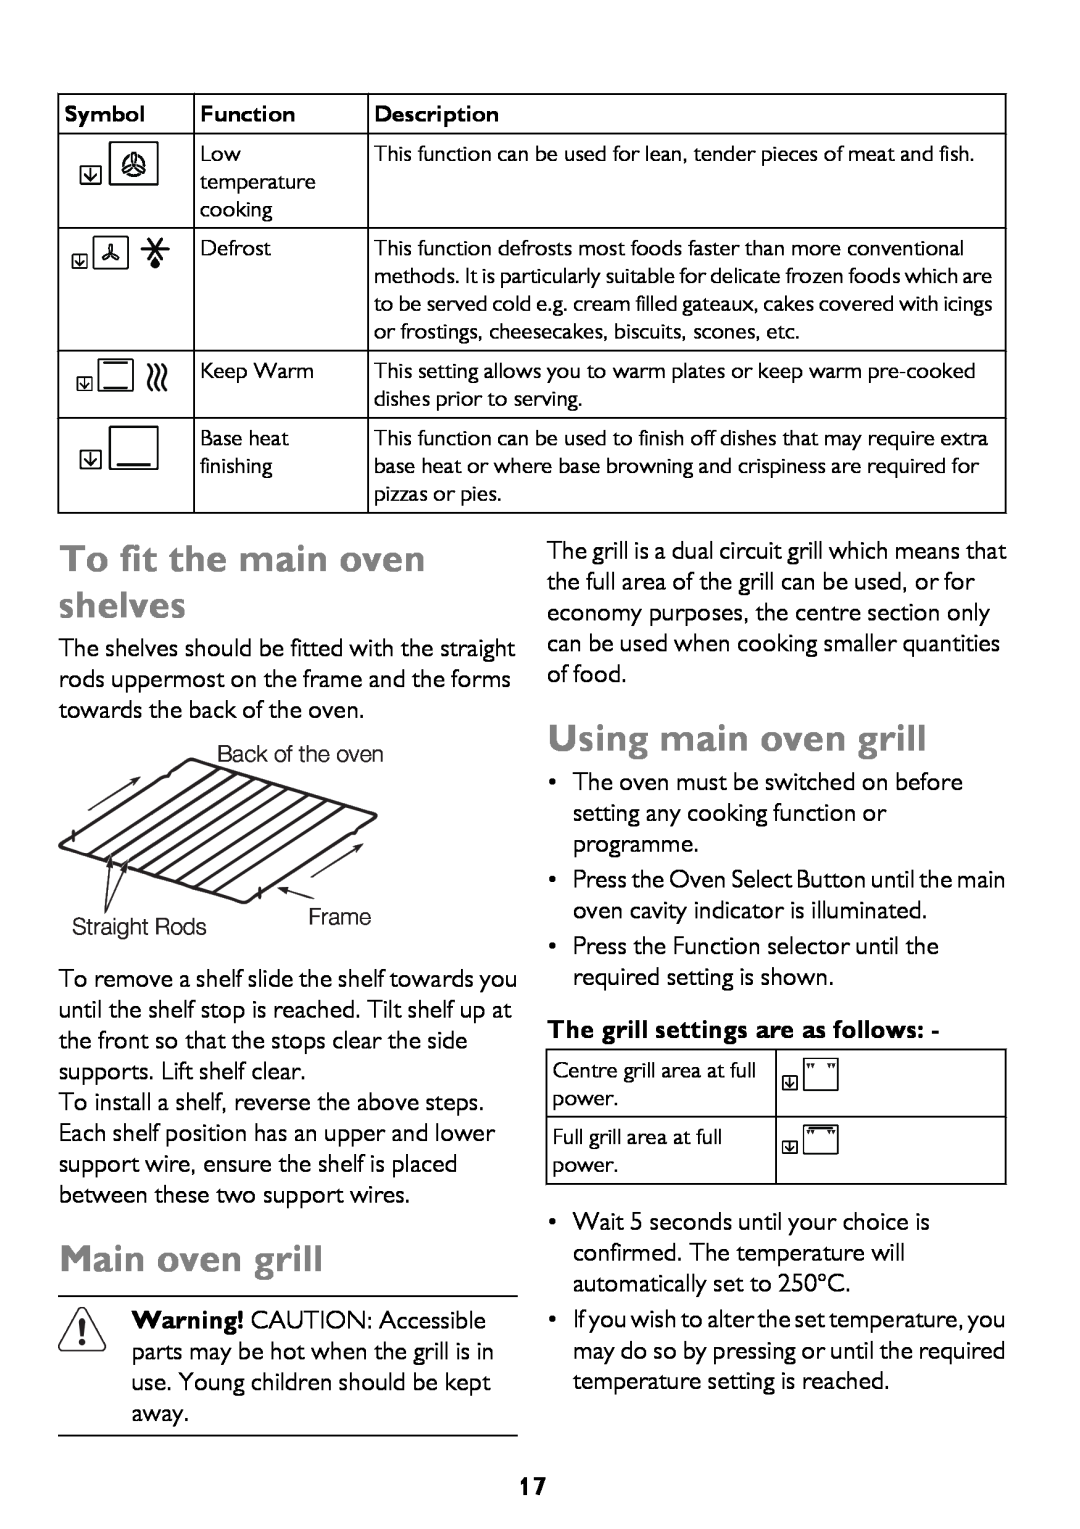 John Lewis JLBIDO911 To fit the main oven shelves, Main oven grill, Using main oven grill, Back of the oven, Straight Rods 